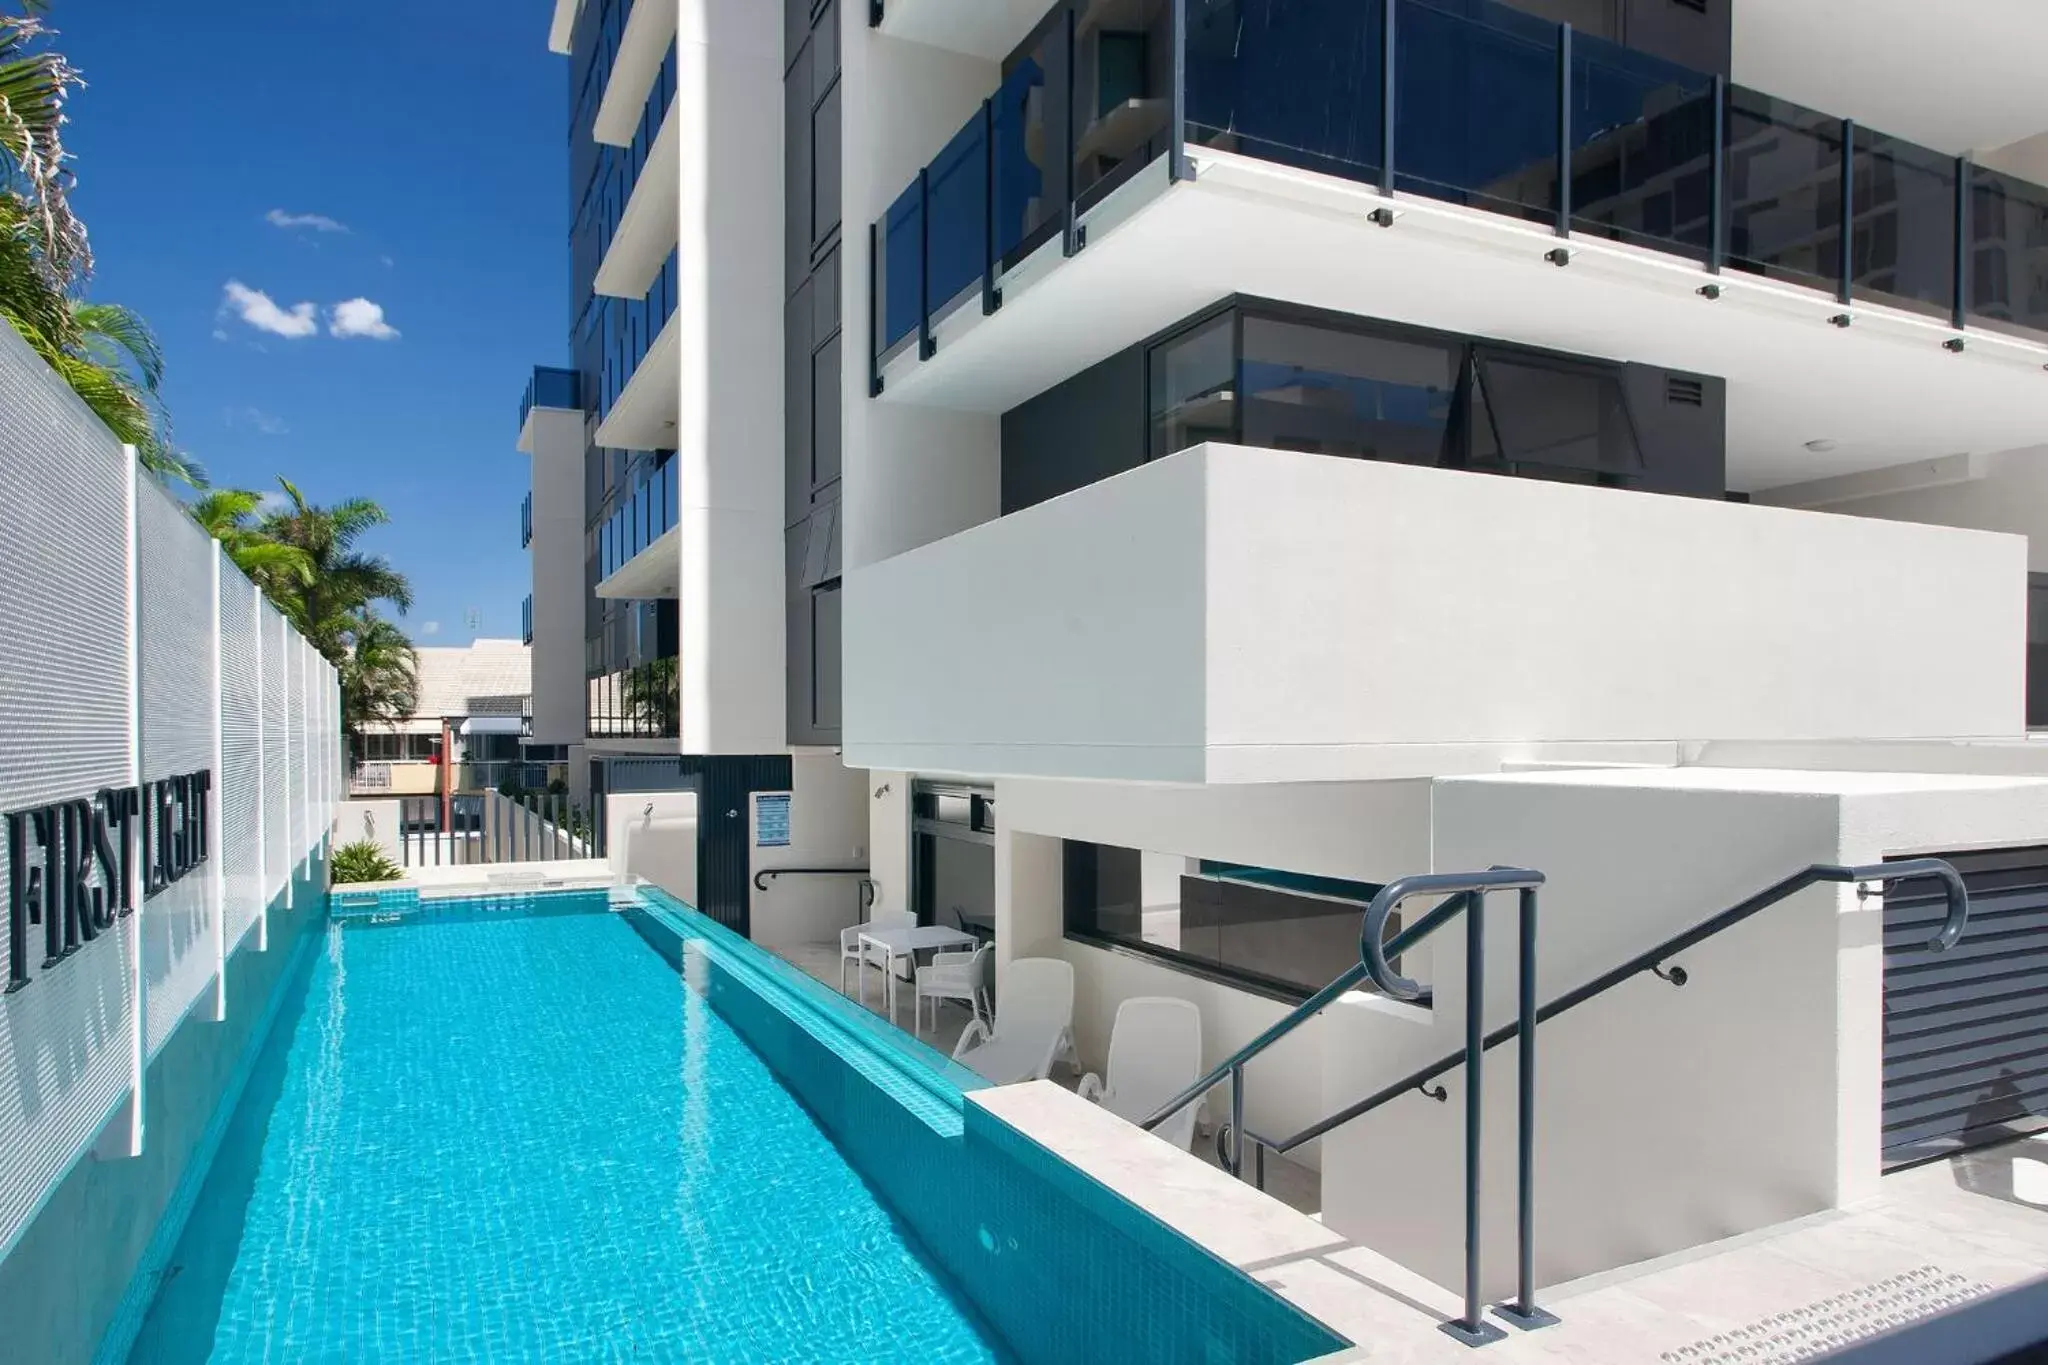 Swimming Pool in First Light Mooloolaba, Ascend Hotel Collection